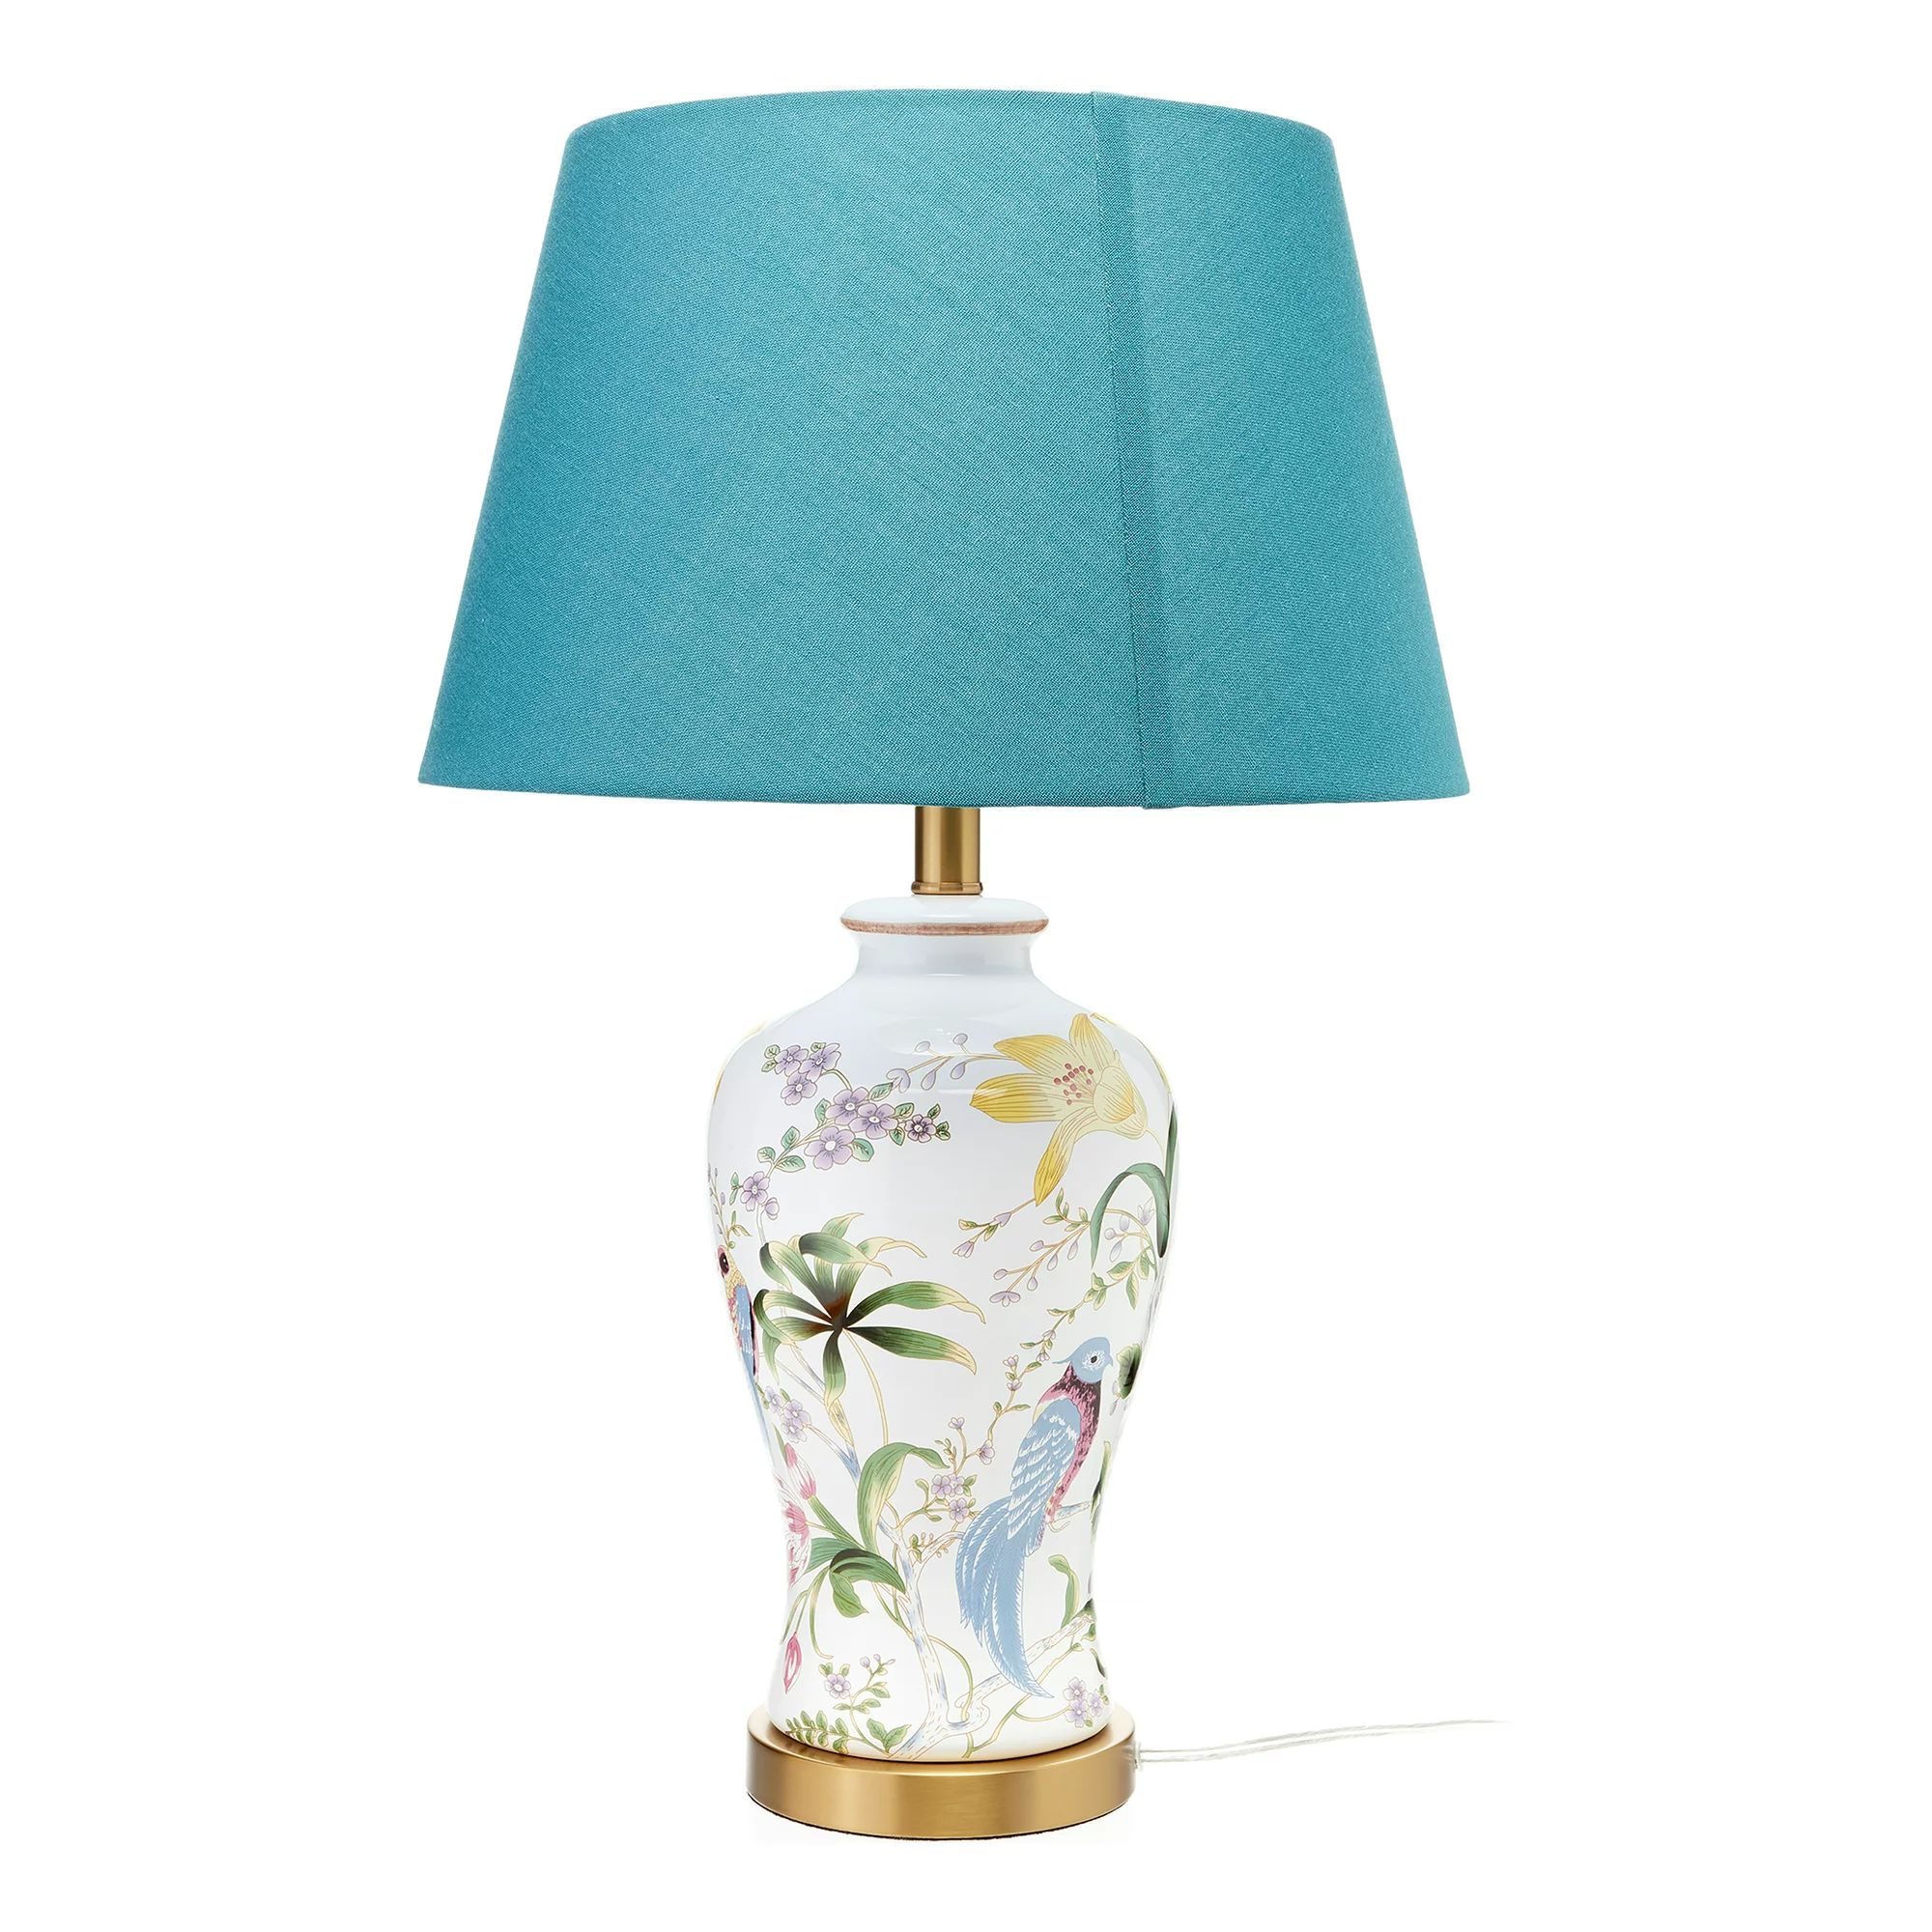 Floral White Ceramic Table Lamp with Teal Shade by Drew Barrymore Flower Home | Walmart (US)